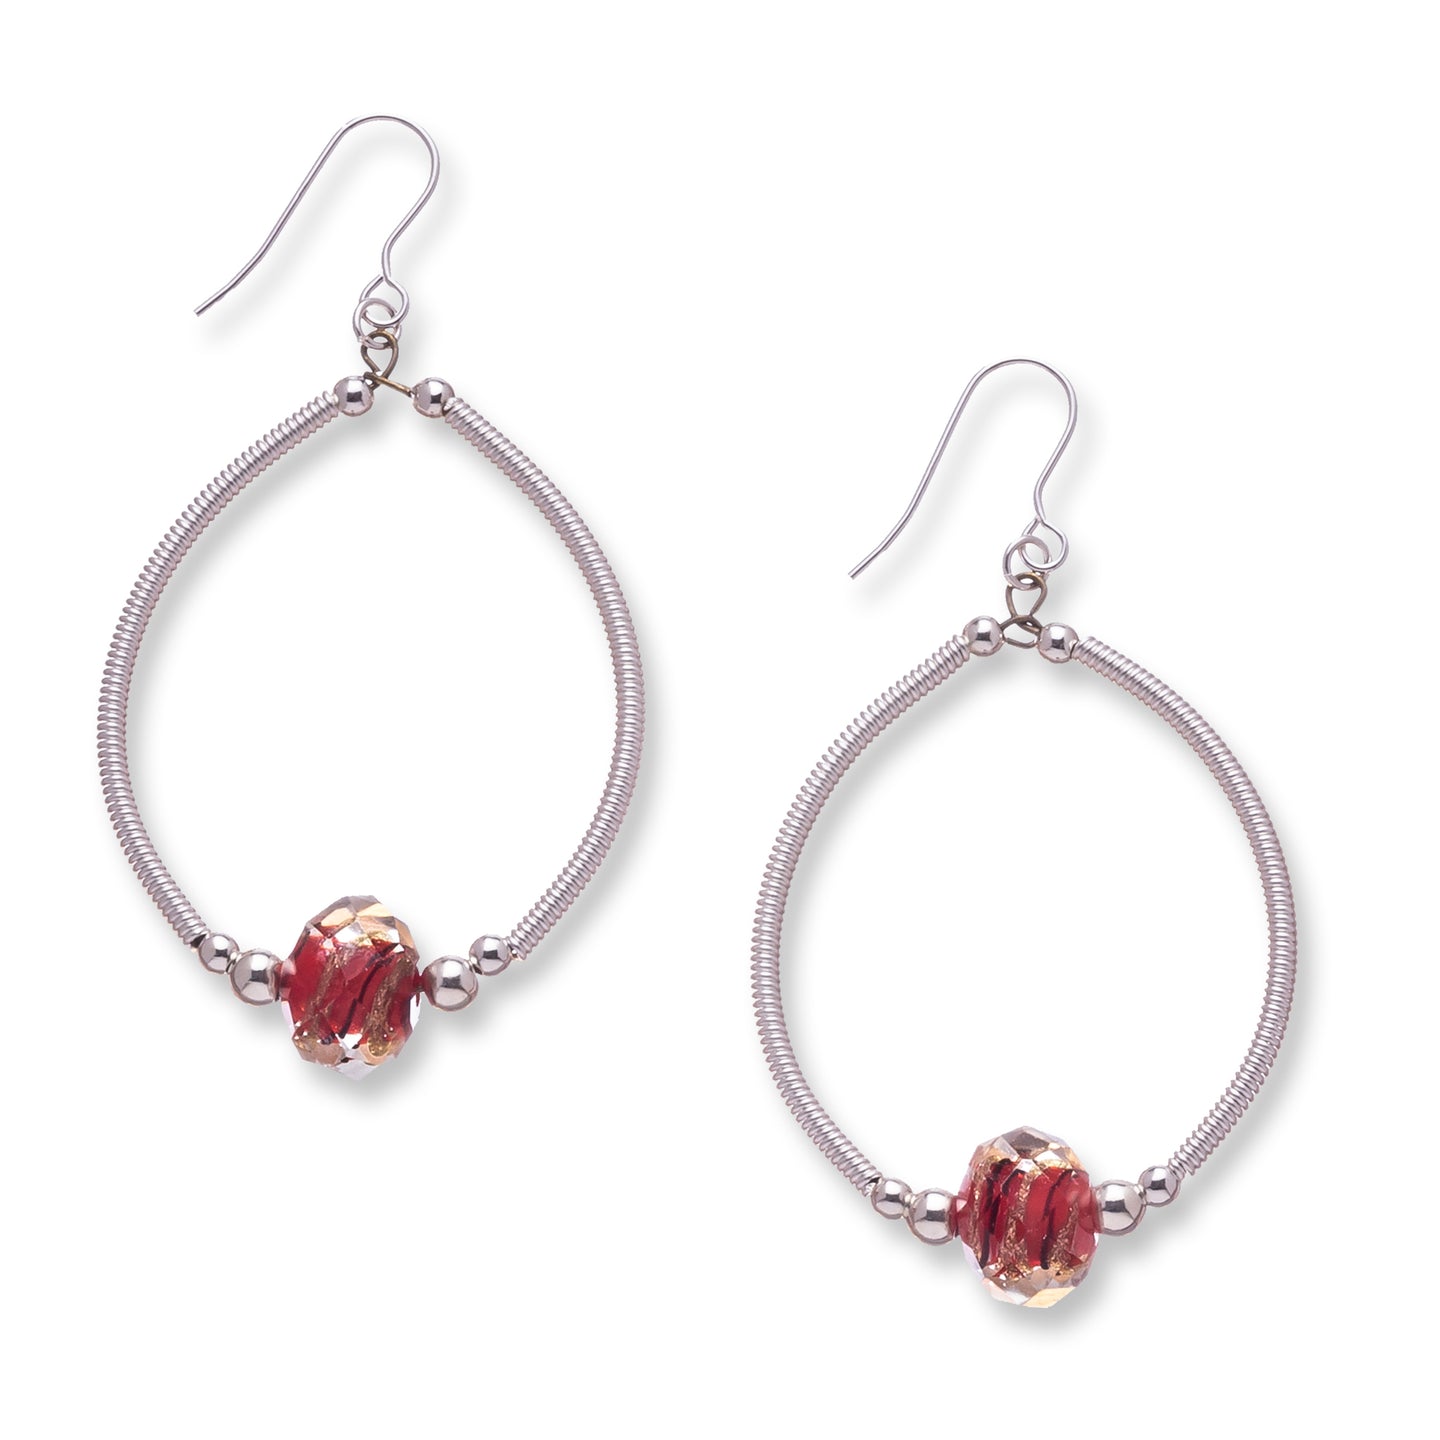 Large statement hoops made from hand wrapped silver filled tubes, sterling silver beads and feature a beautiful lampwork glass centre bead in red and gold colour mix.  These earrings sit on sterling silver ear wires and come with backs included. The drop length is 5cm and measured from the base of the ear wire.  They come beautfully presented in an eco friendly branded gift box for safe keeping.  Designed & Handmade in Dingle